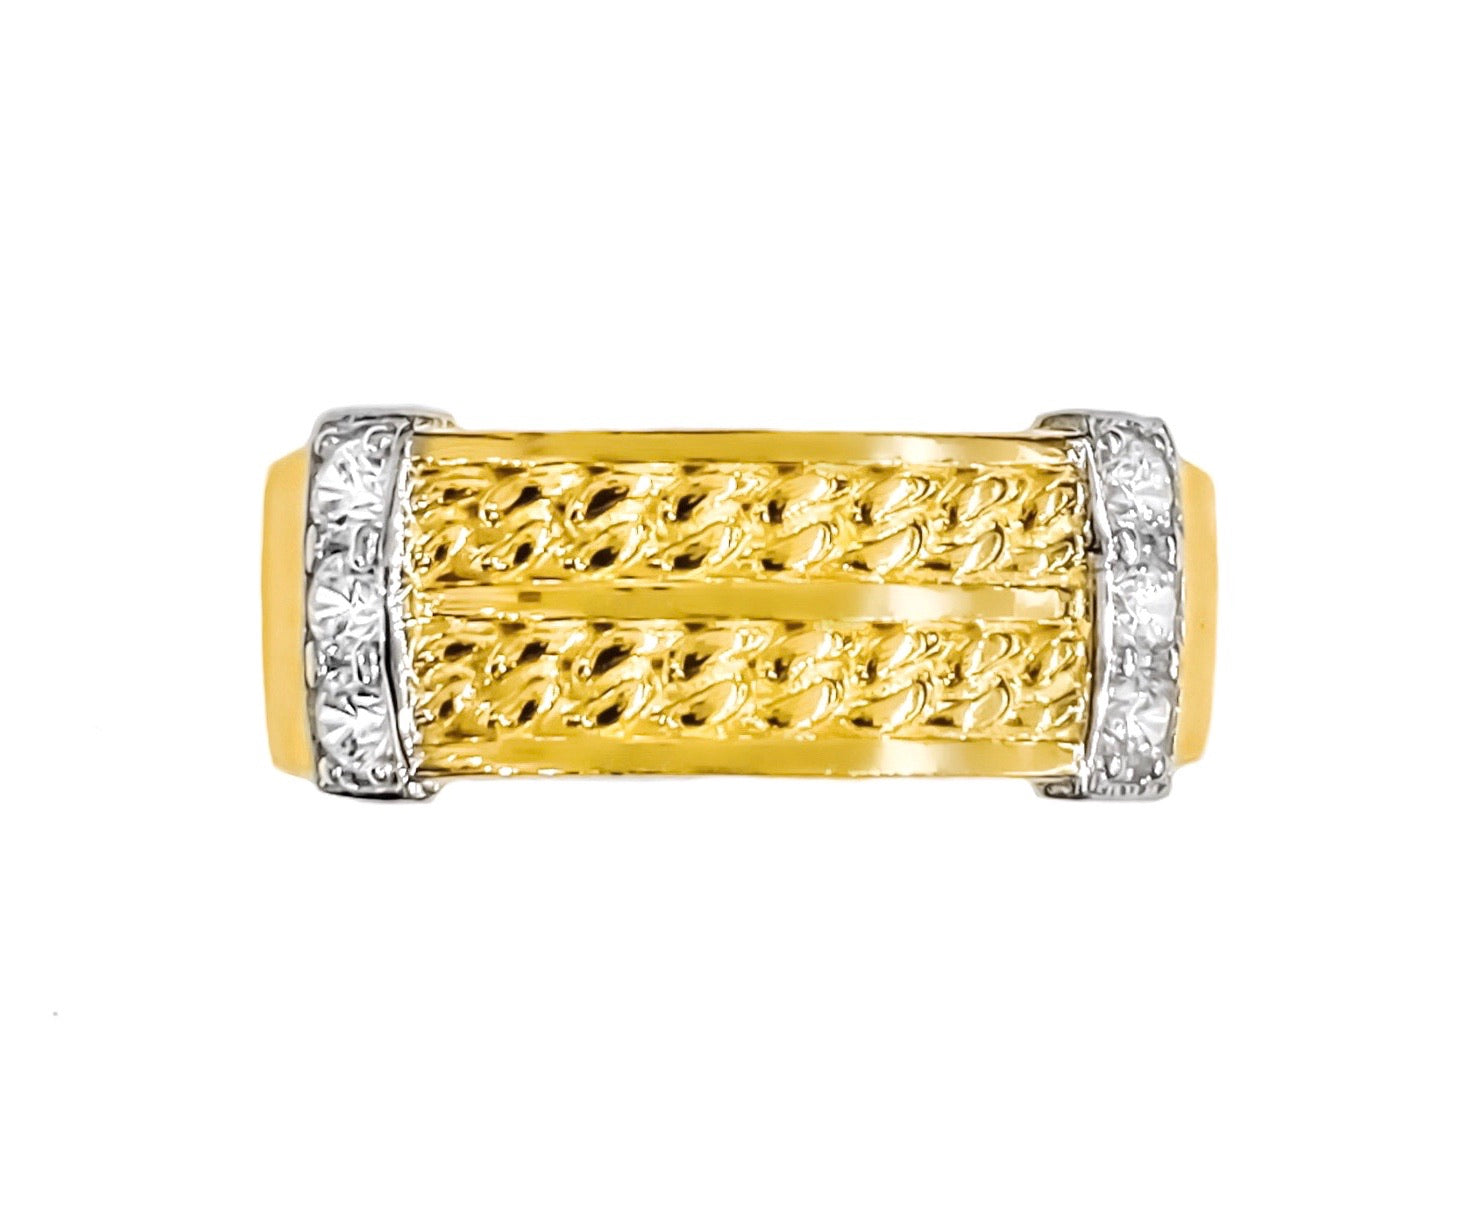 14K YELLOW GOLD PAVE DOUBLE CUBAN BEZEL RING